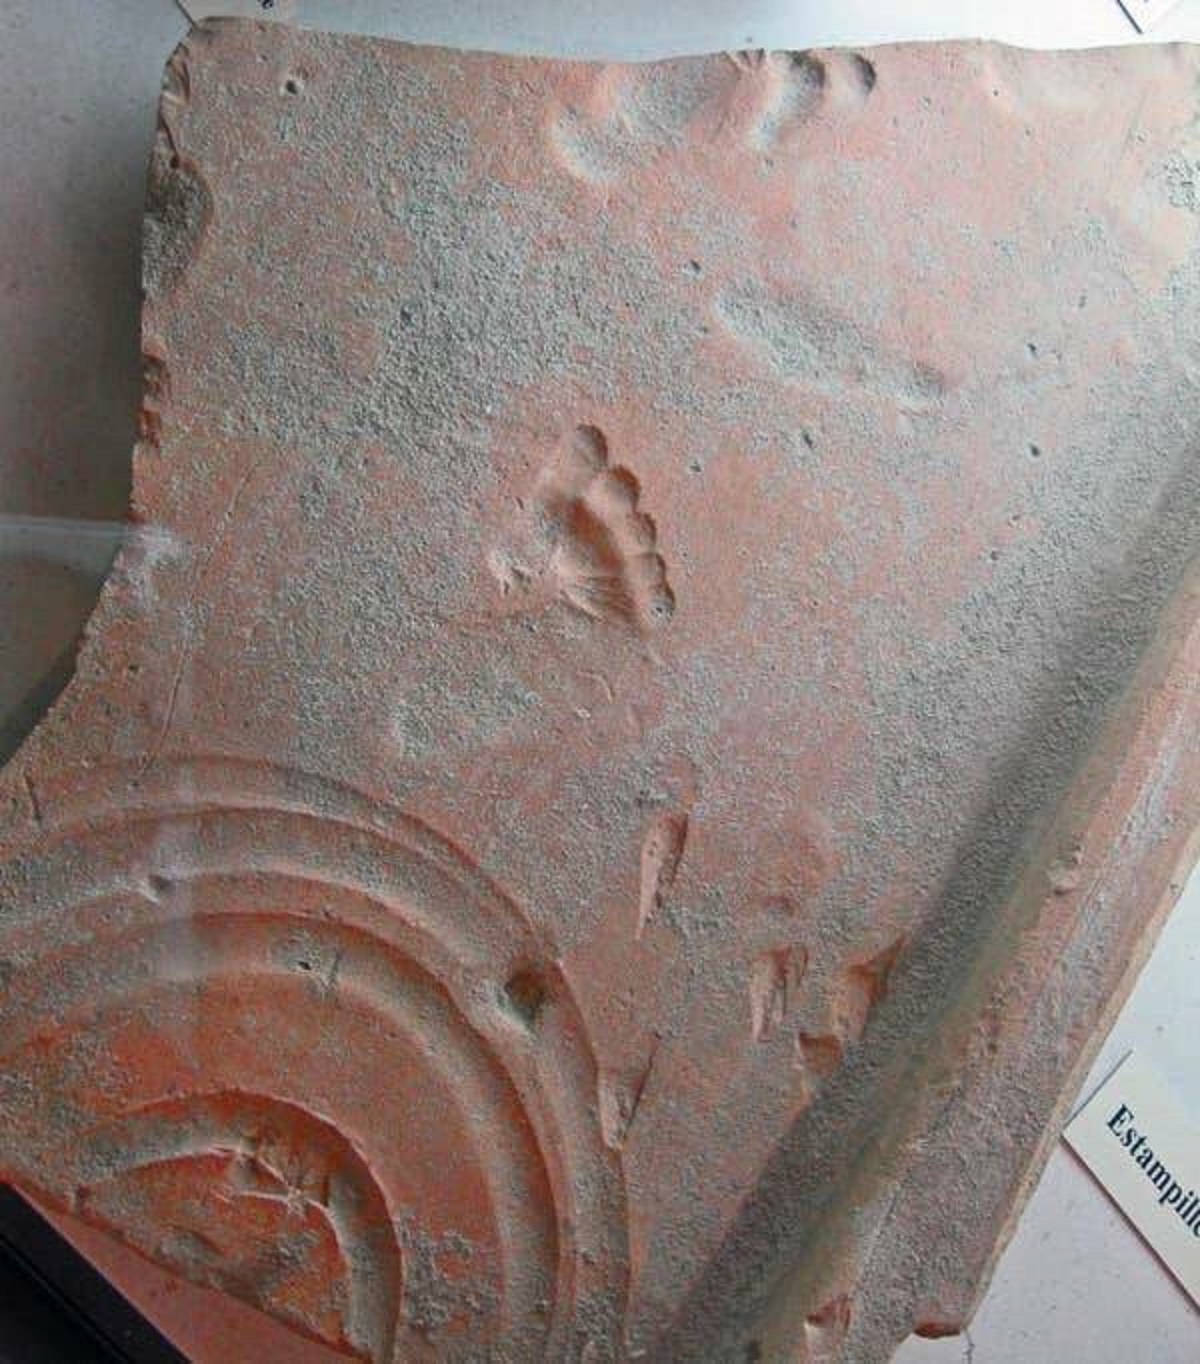 Over 2,000 years ago, a child living in ancient Rome made this footprint in a clay tile while it was drying.